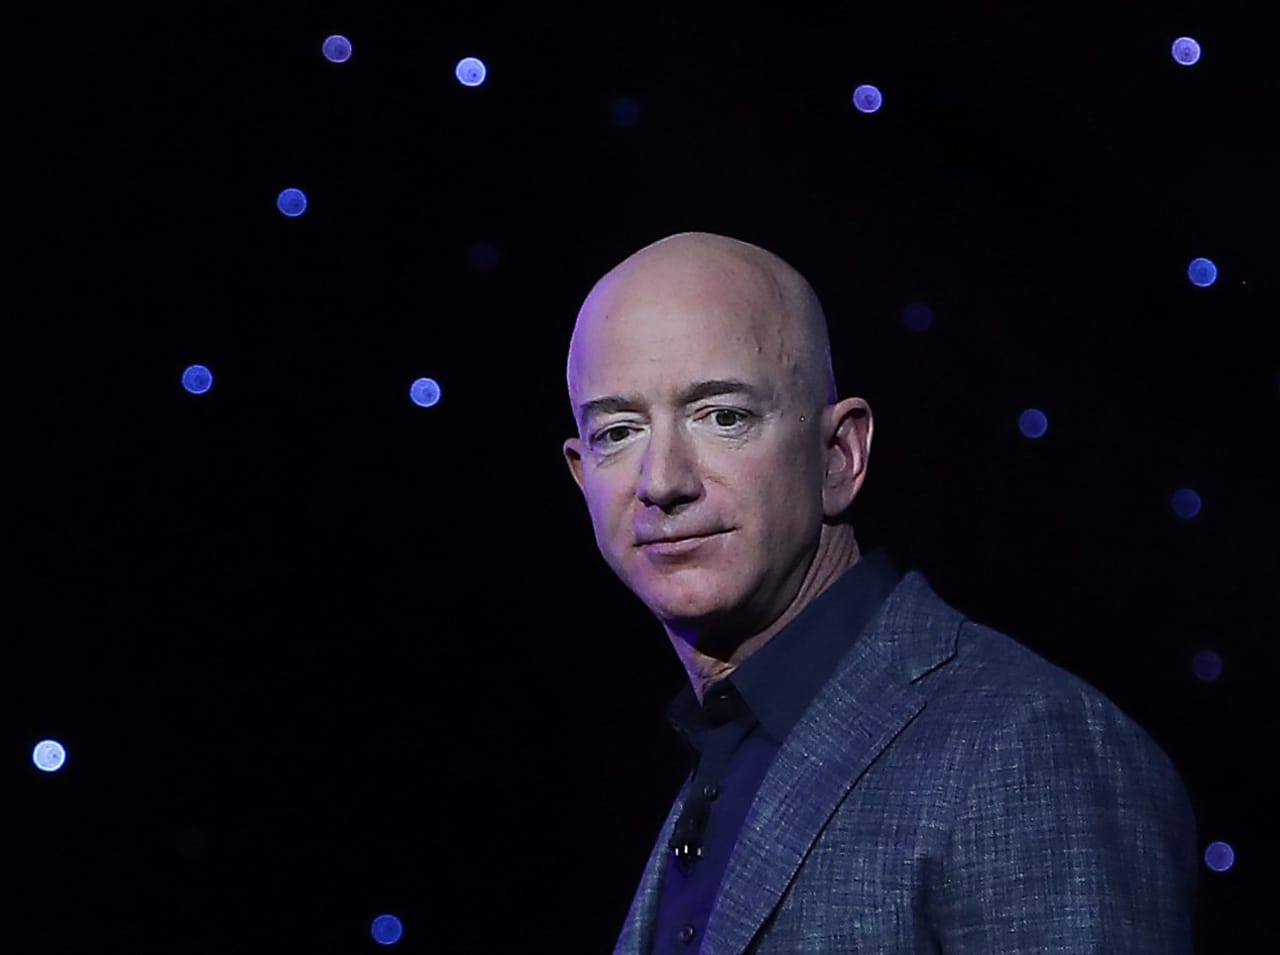 Jeff Bezos aims to sell another $5 billion of Amazon stock, after earlier selling spree